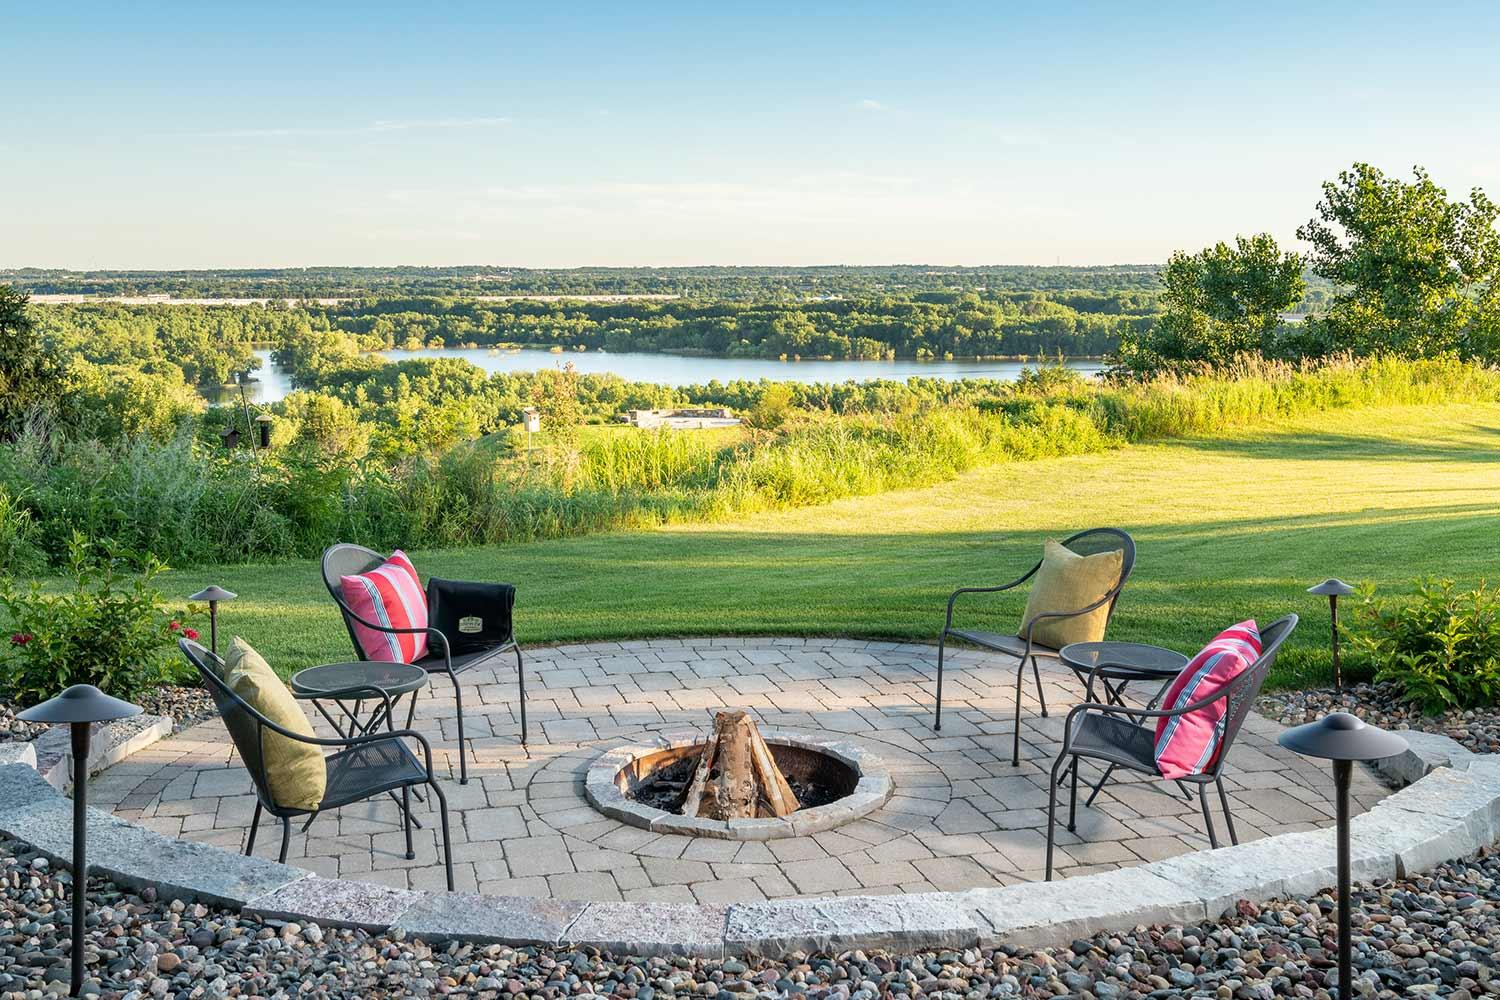 Fire pit patio overlooking the Minnesota river.